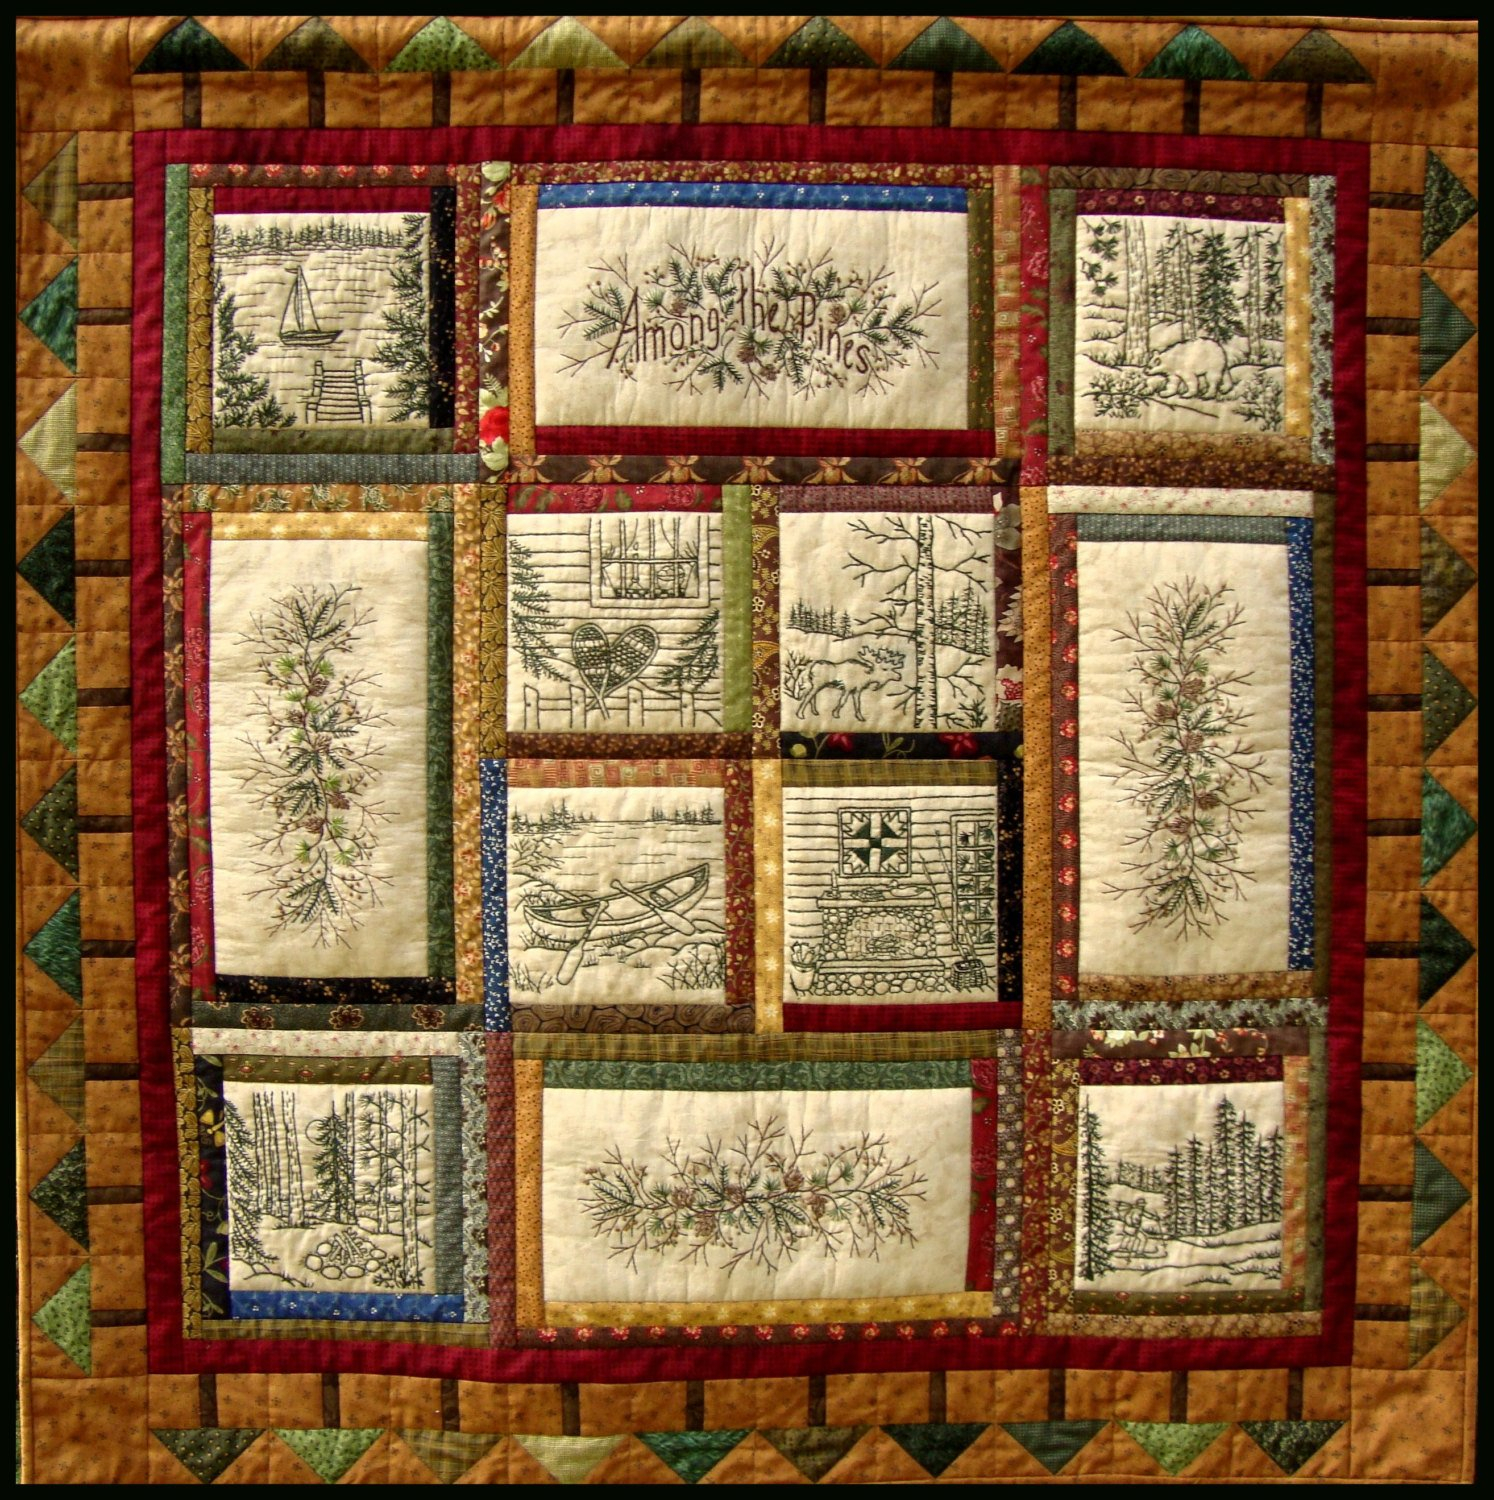 Embroidery Patterns For Quilts Among The Pines Wellington Designs